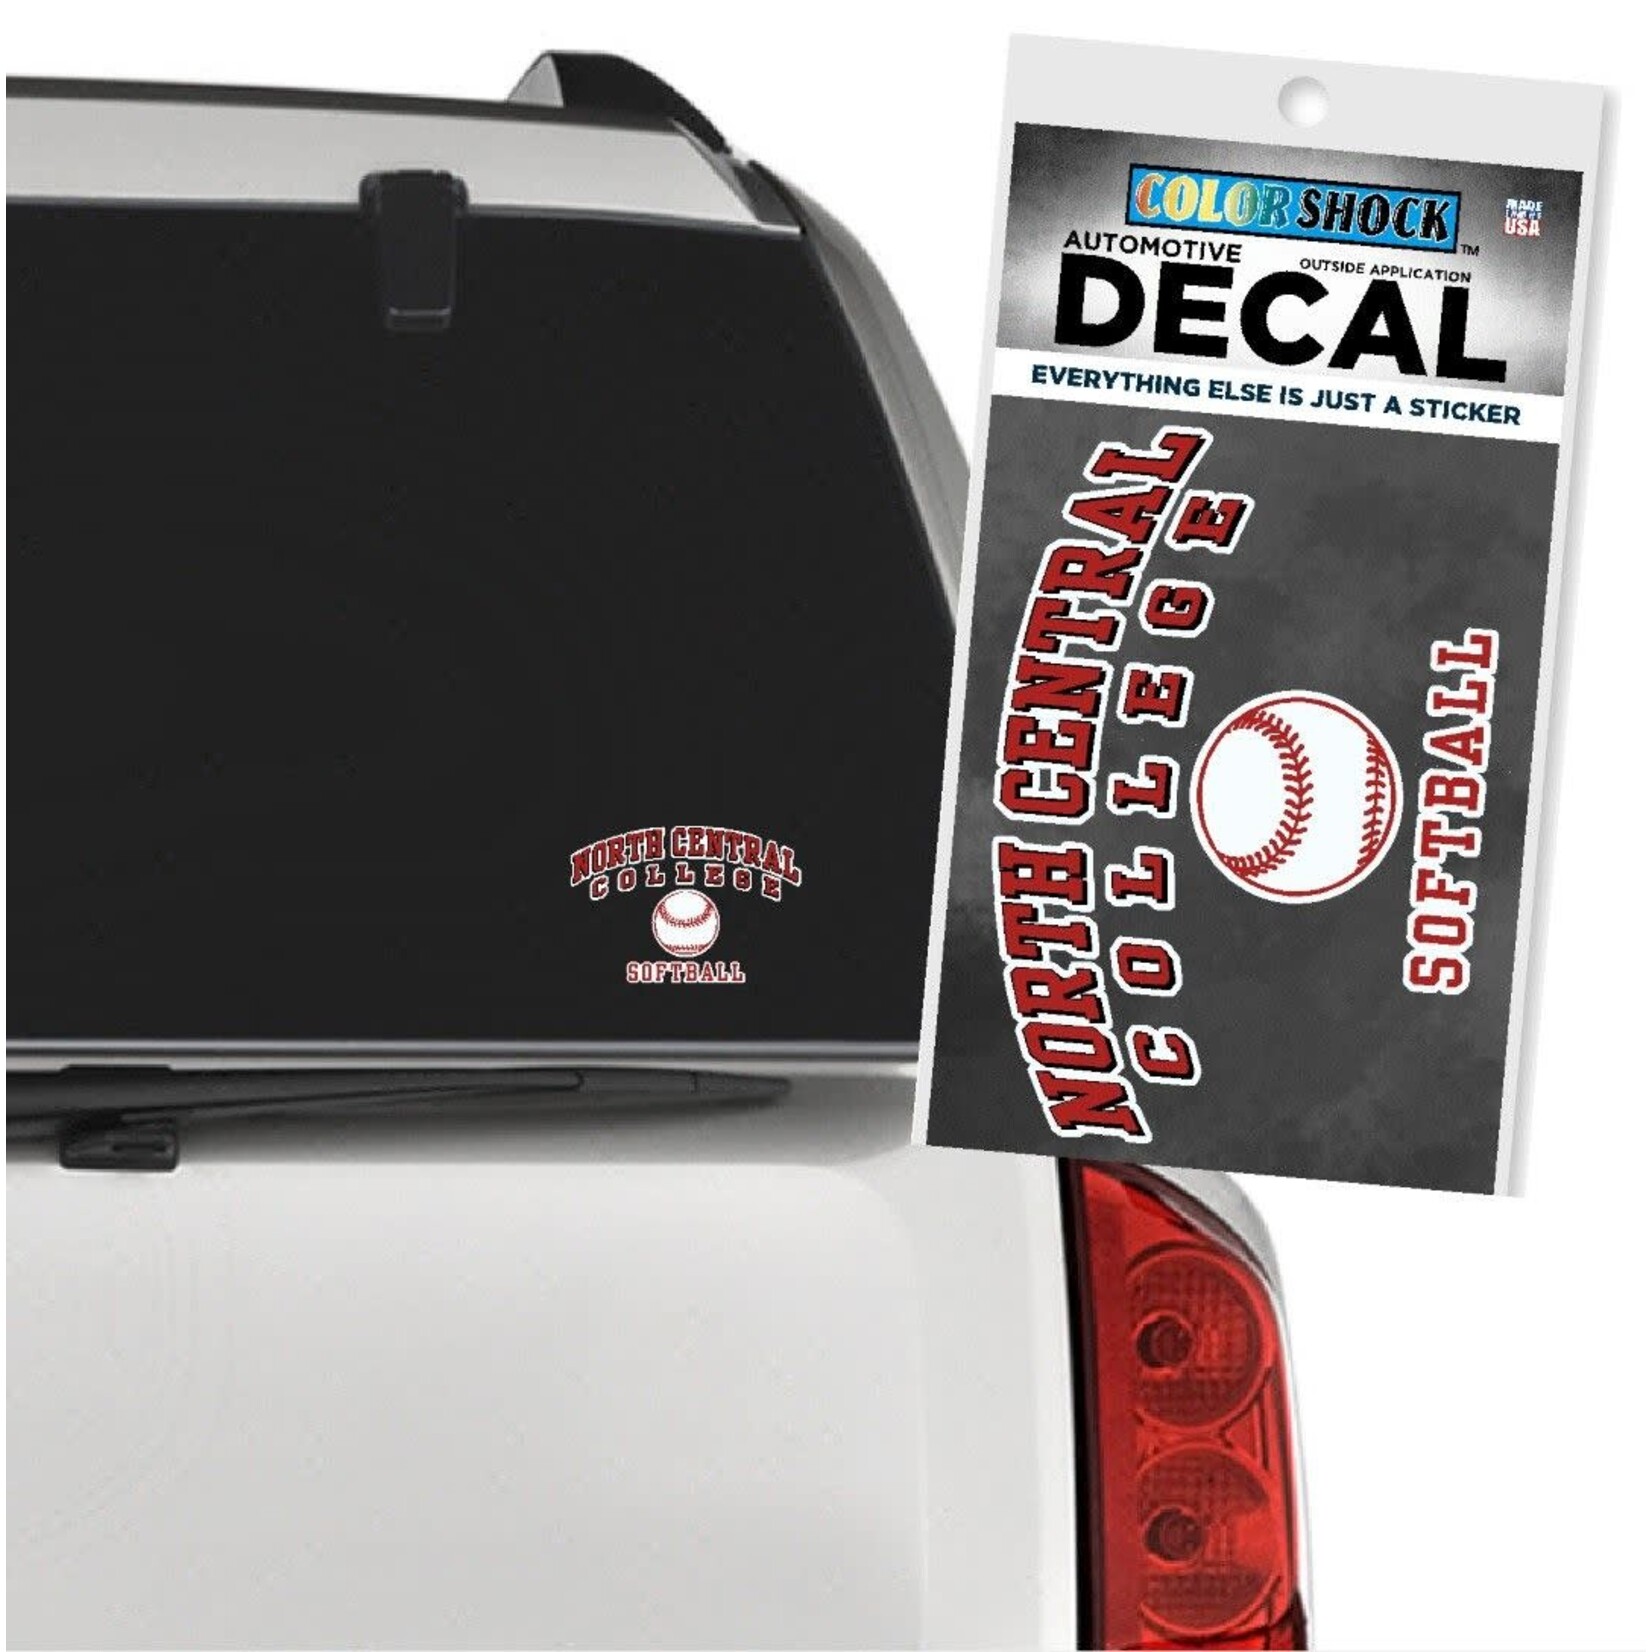 CDI Corporation Decal by Colorshock with Team Names  Softball